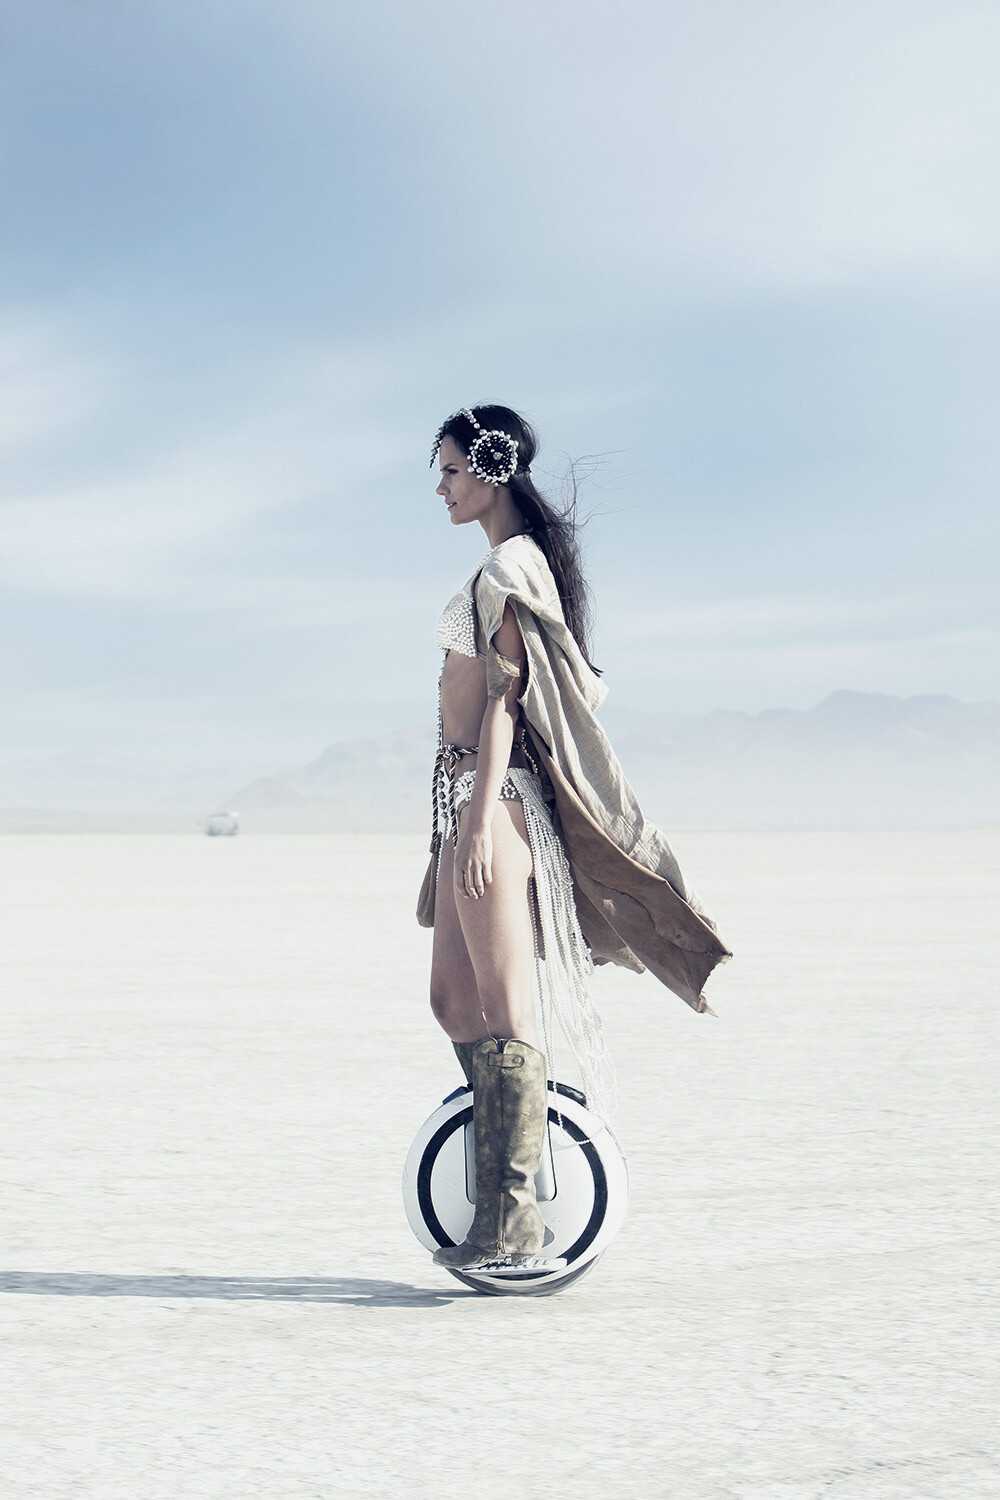 The amazing art festival called Burning Man. Discover the weird and wonderful visual imagary from Justin Hession Photography. An Australian portrait photograher who visited Burning Man with Planet Visible in 2016